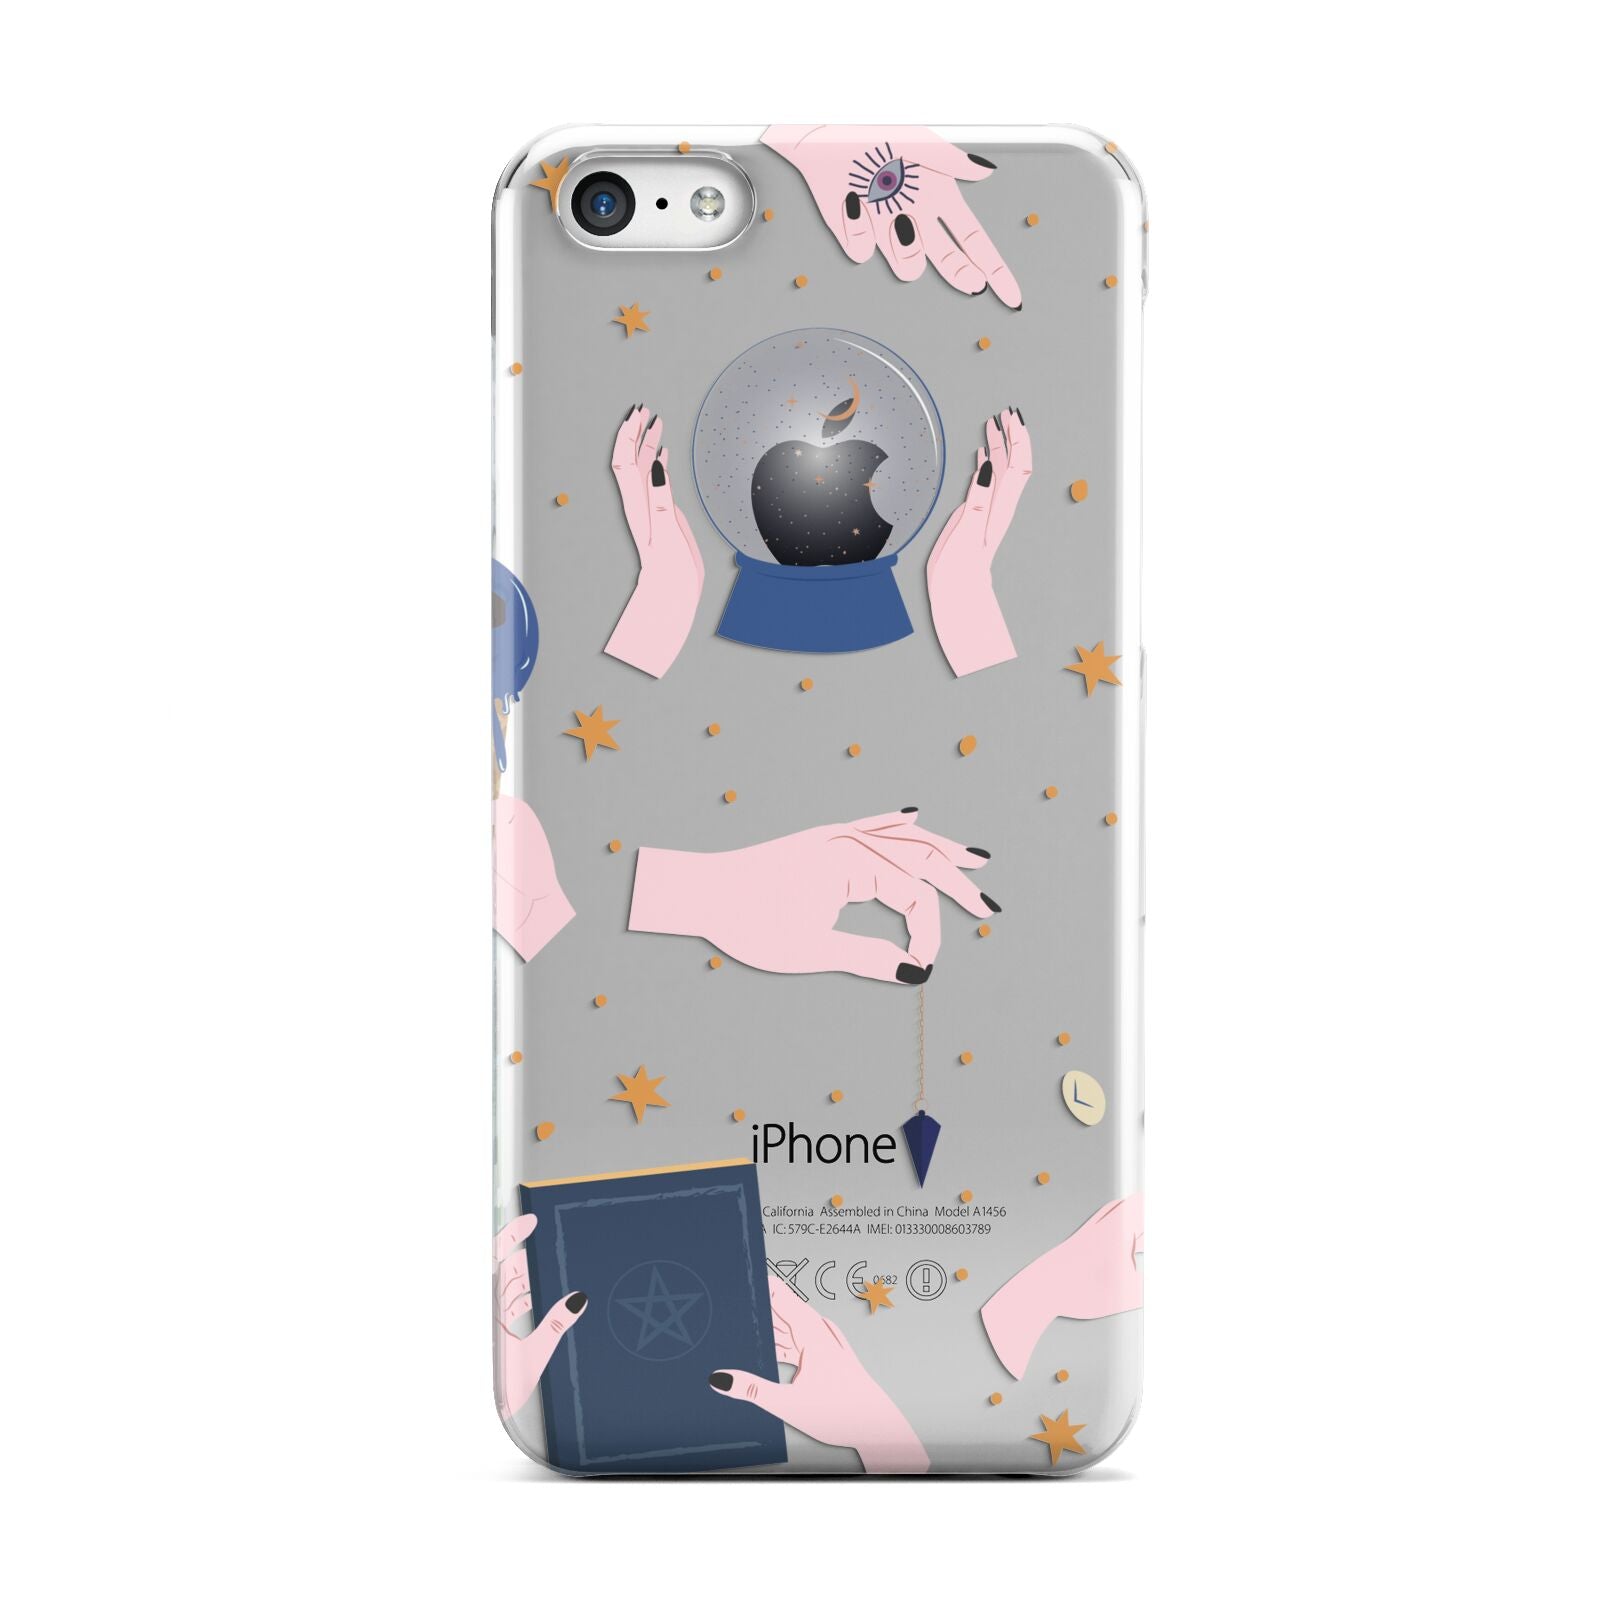 Clairvoyant Witches Hands Apple iPhone 5c Case